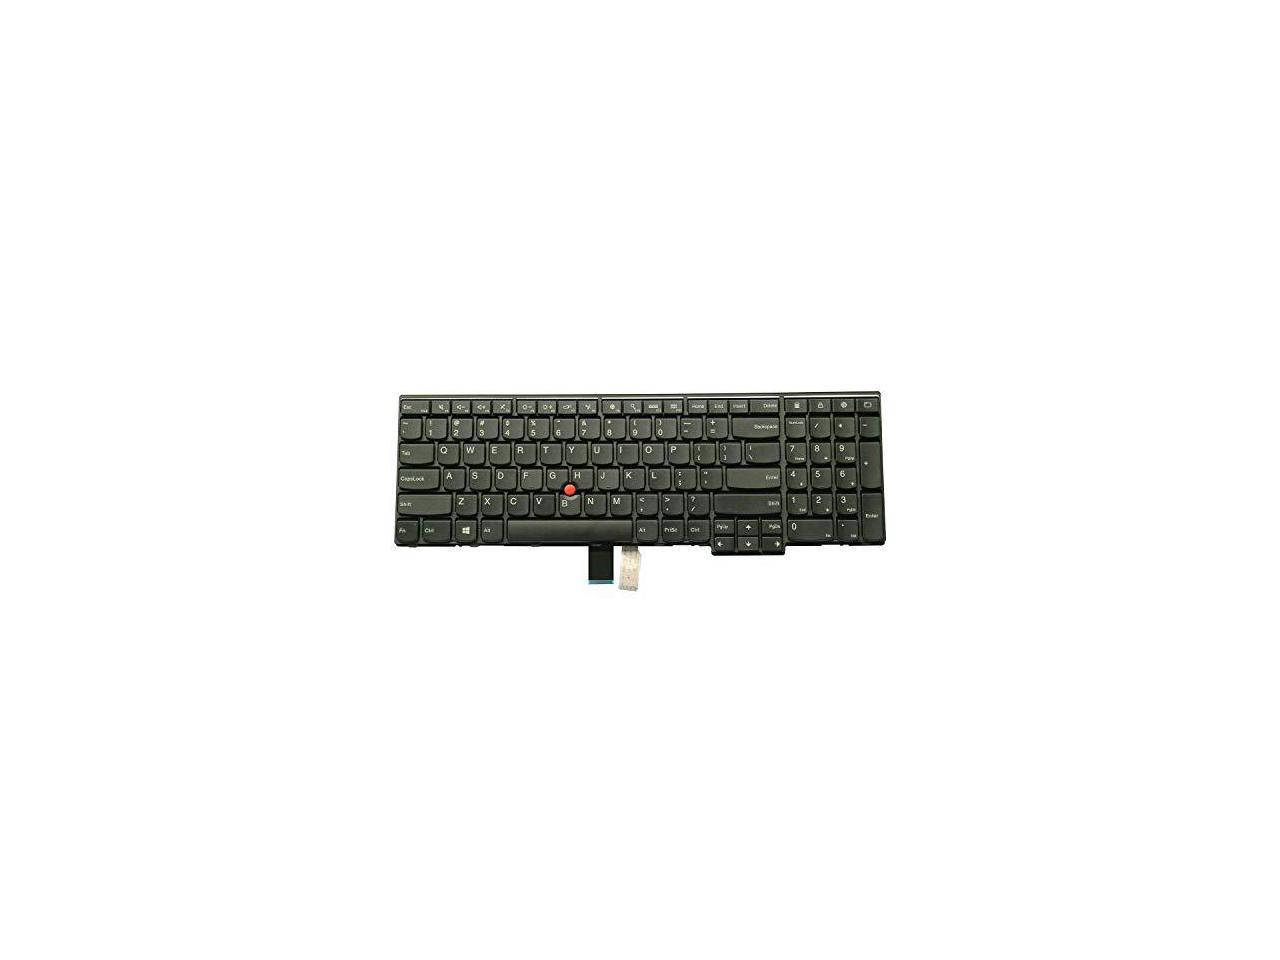 AUTENS Replacement US Keyboard for Lenovo ThinkPad T540 T540p L540 W540  W541 T550 W550 W550s T560 L560 L570 Laptop No Backlight (6 Fixing Screws) -  